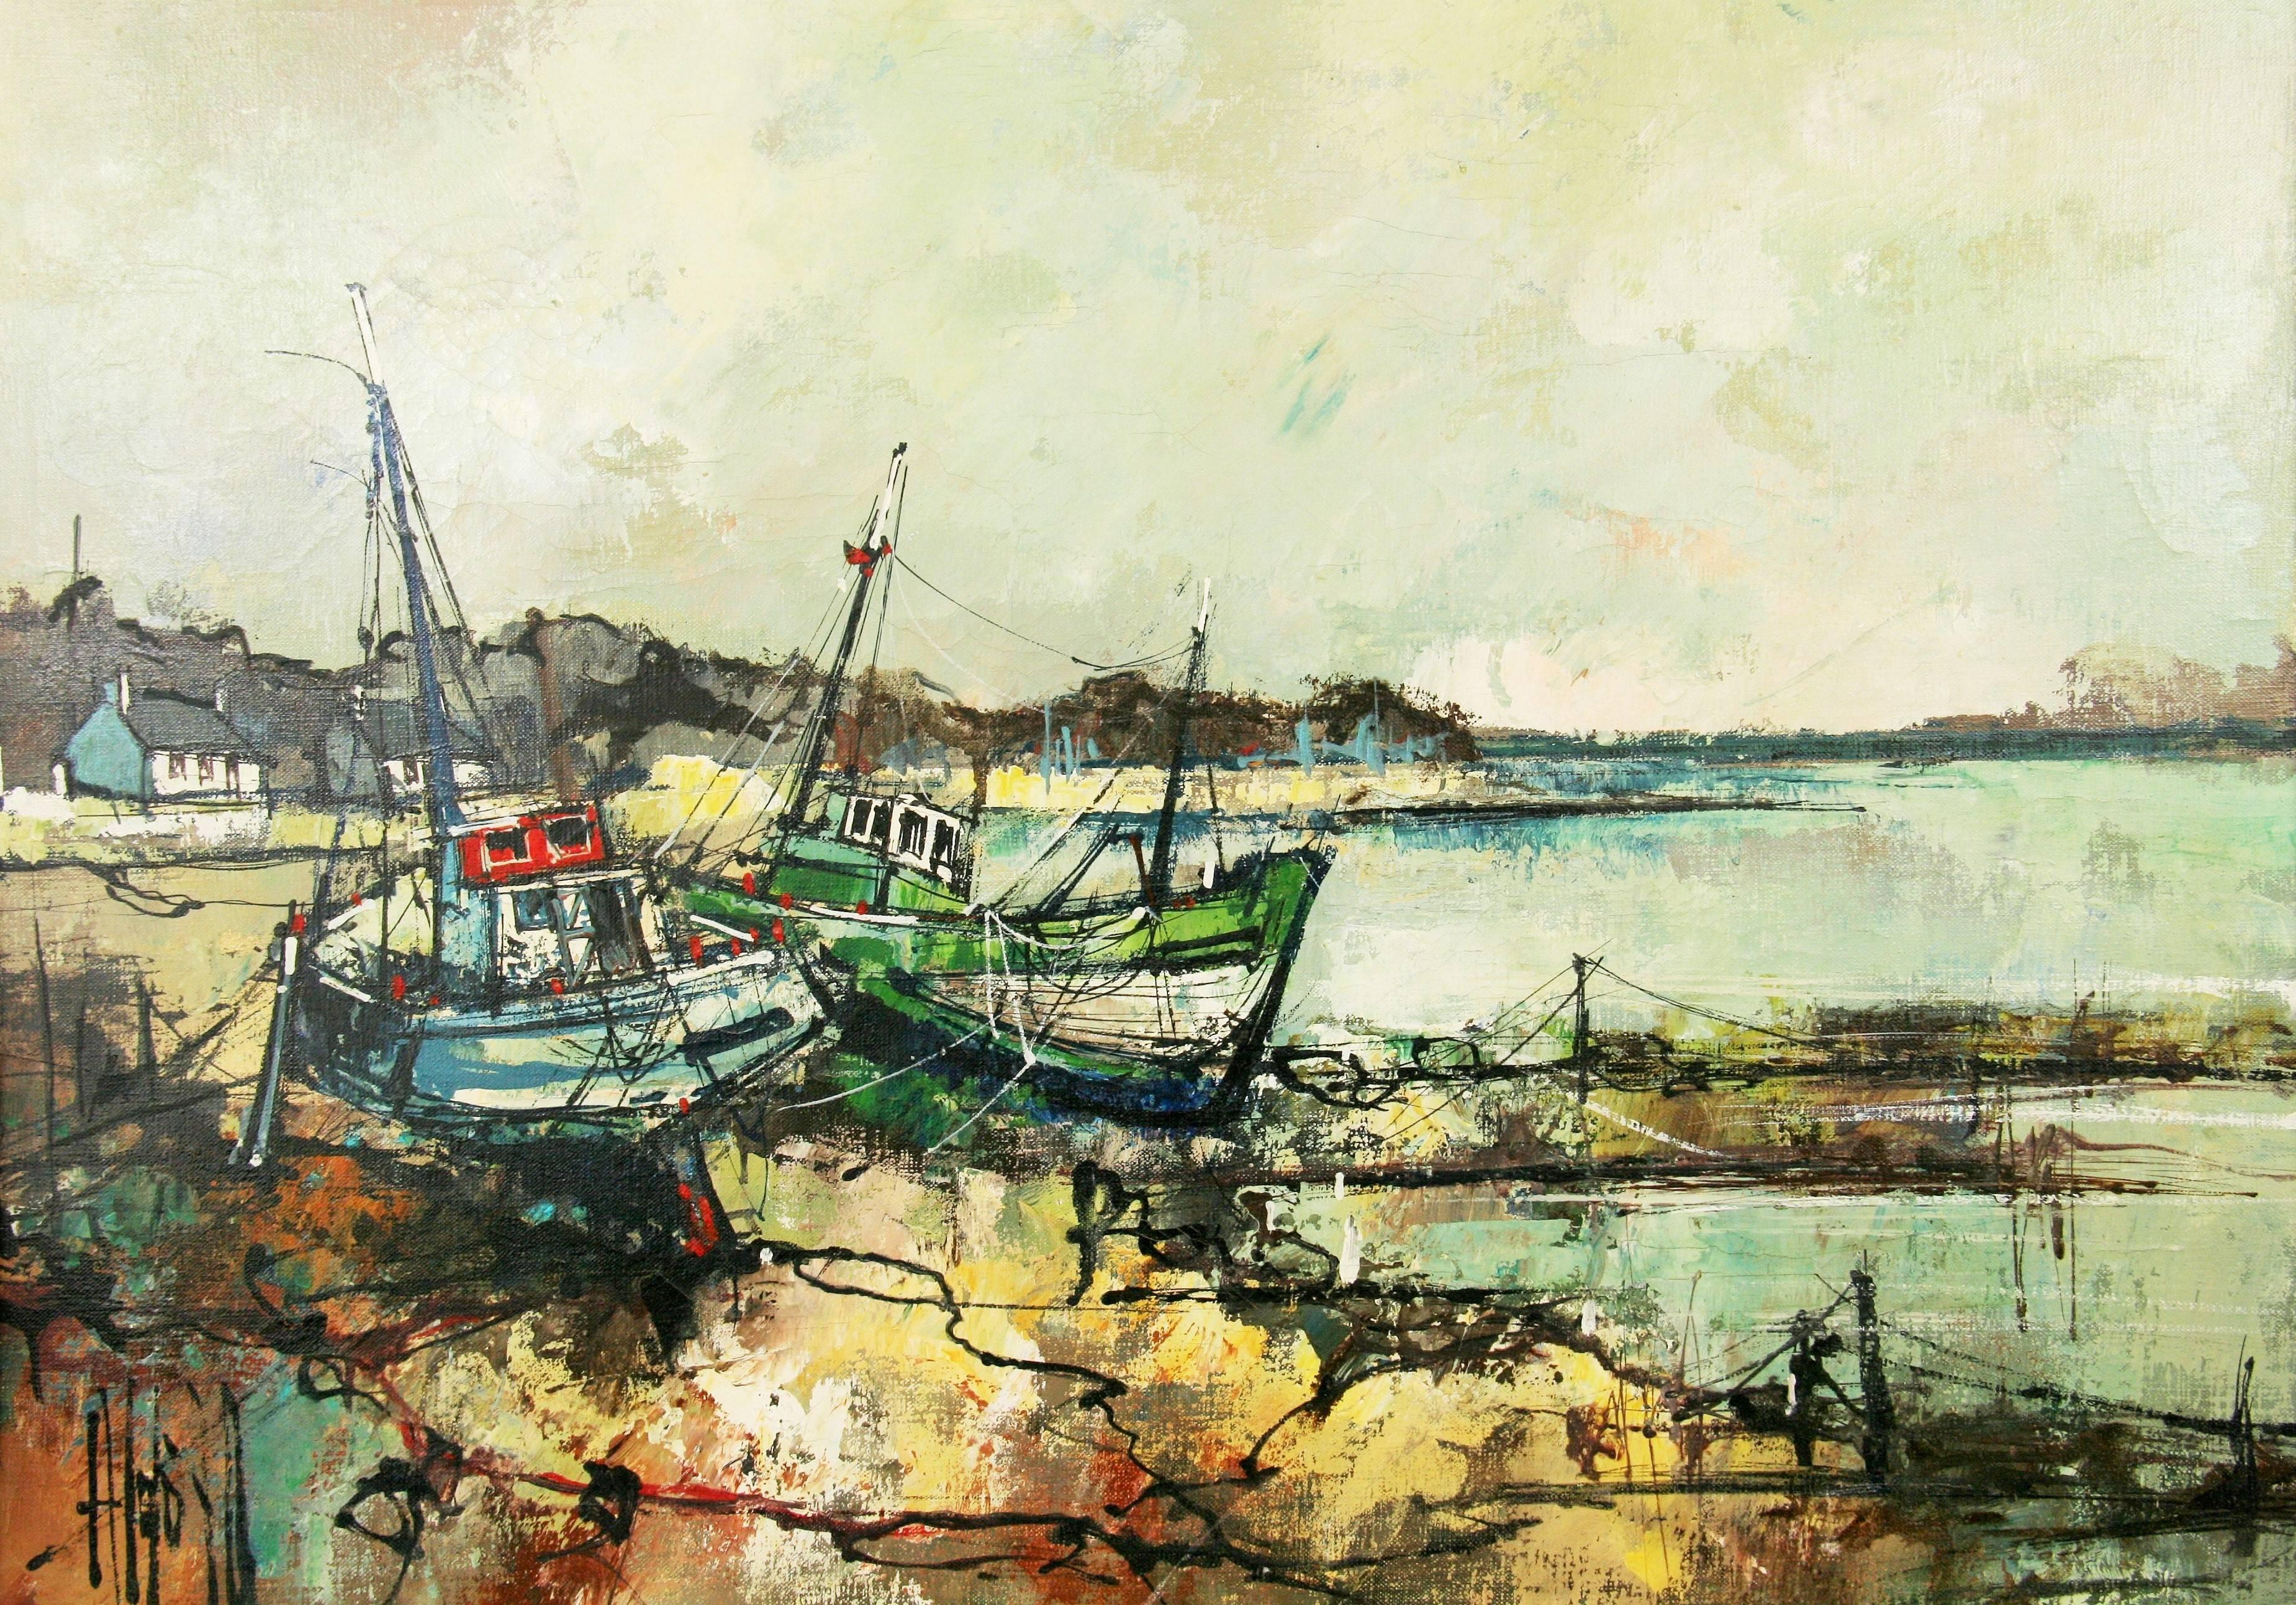 Aldo Luongo Landscape Painting -   Impressionist Fishing Boat in a Harbor Scene Seascape by A.Luongo 1940